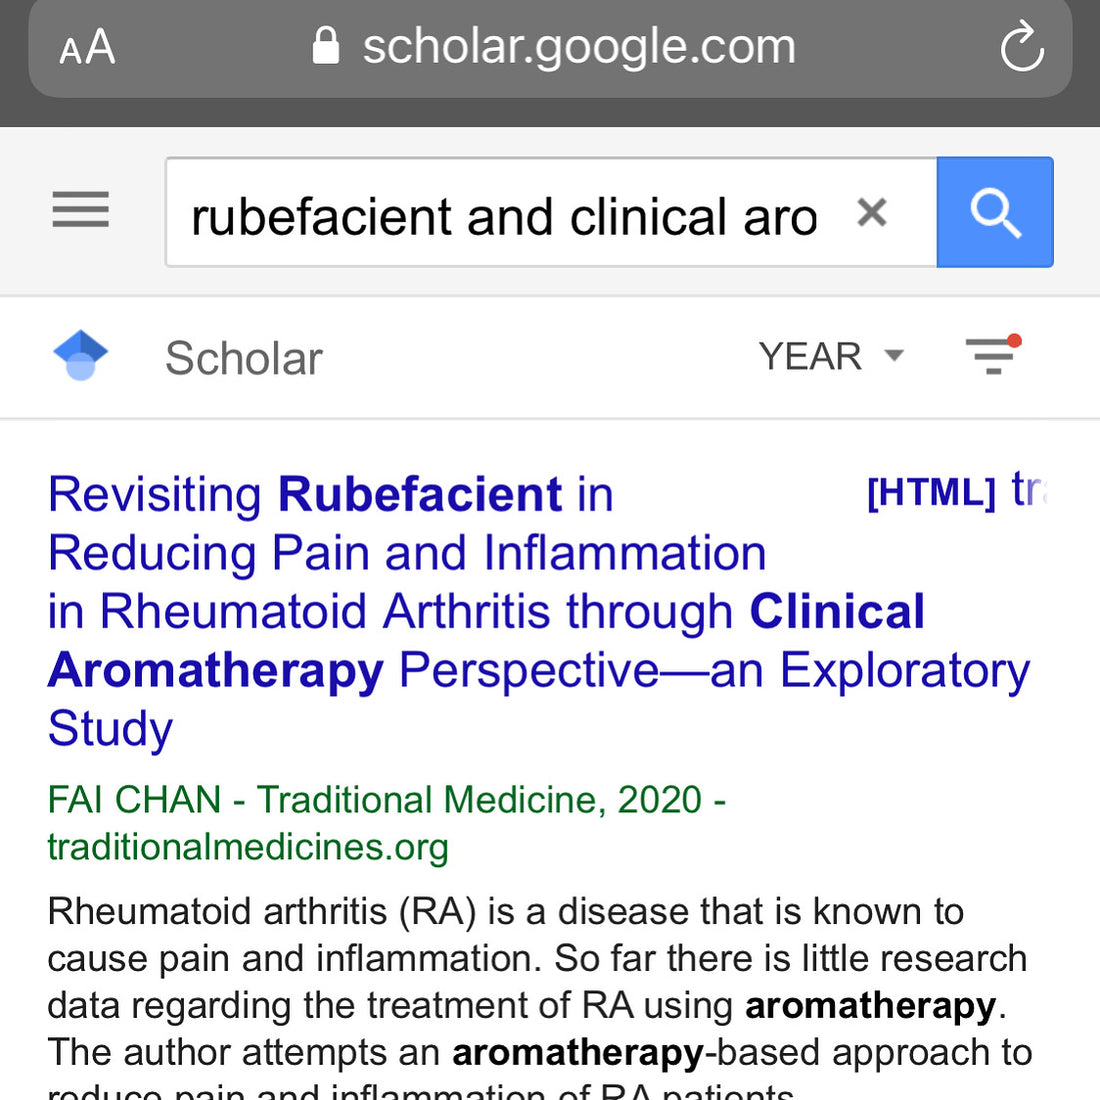 My article can be searched through Google Scholar